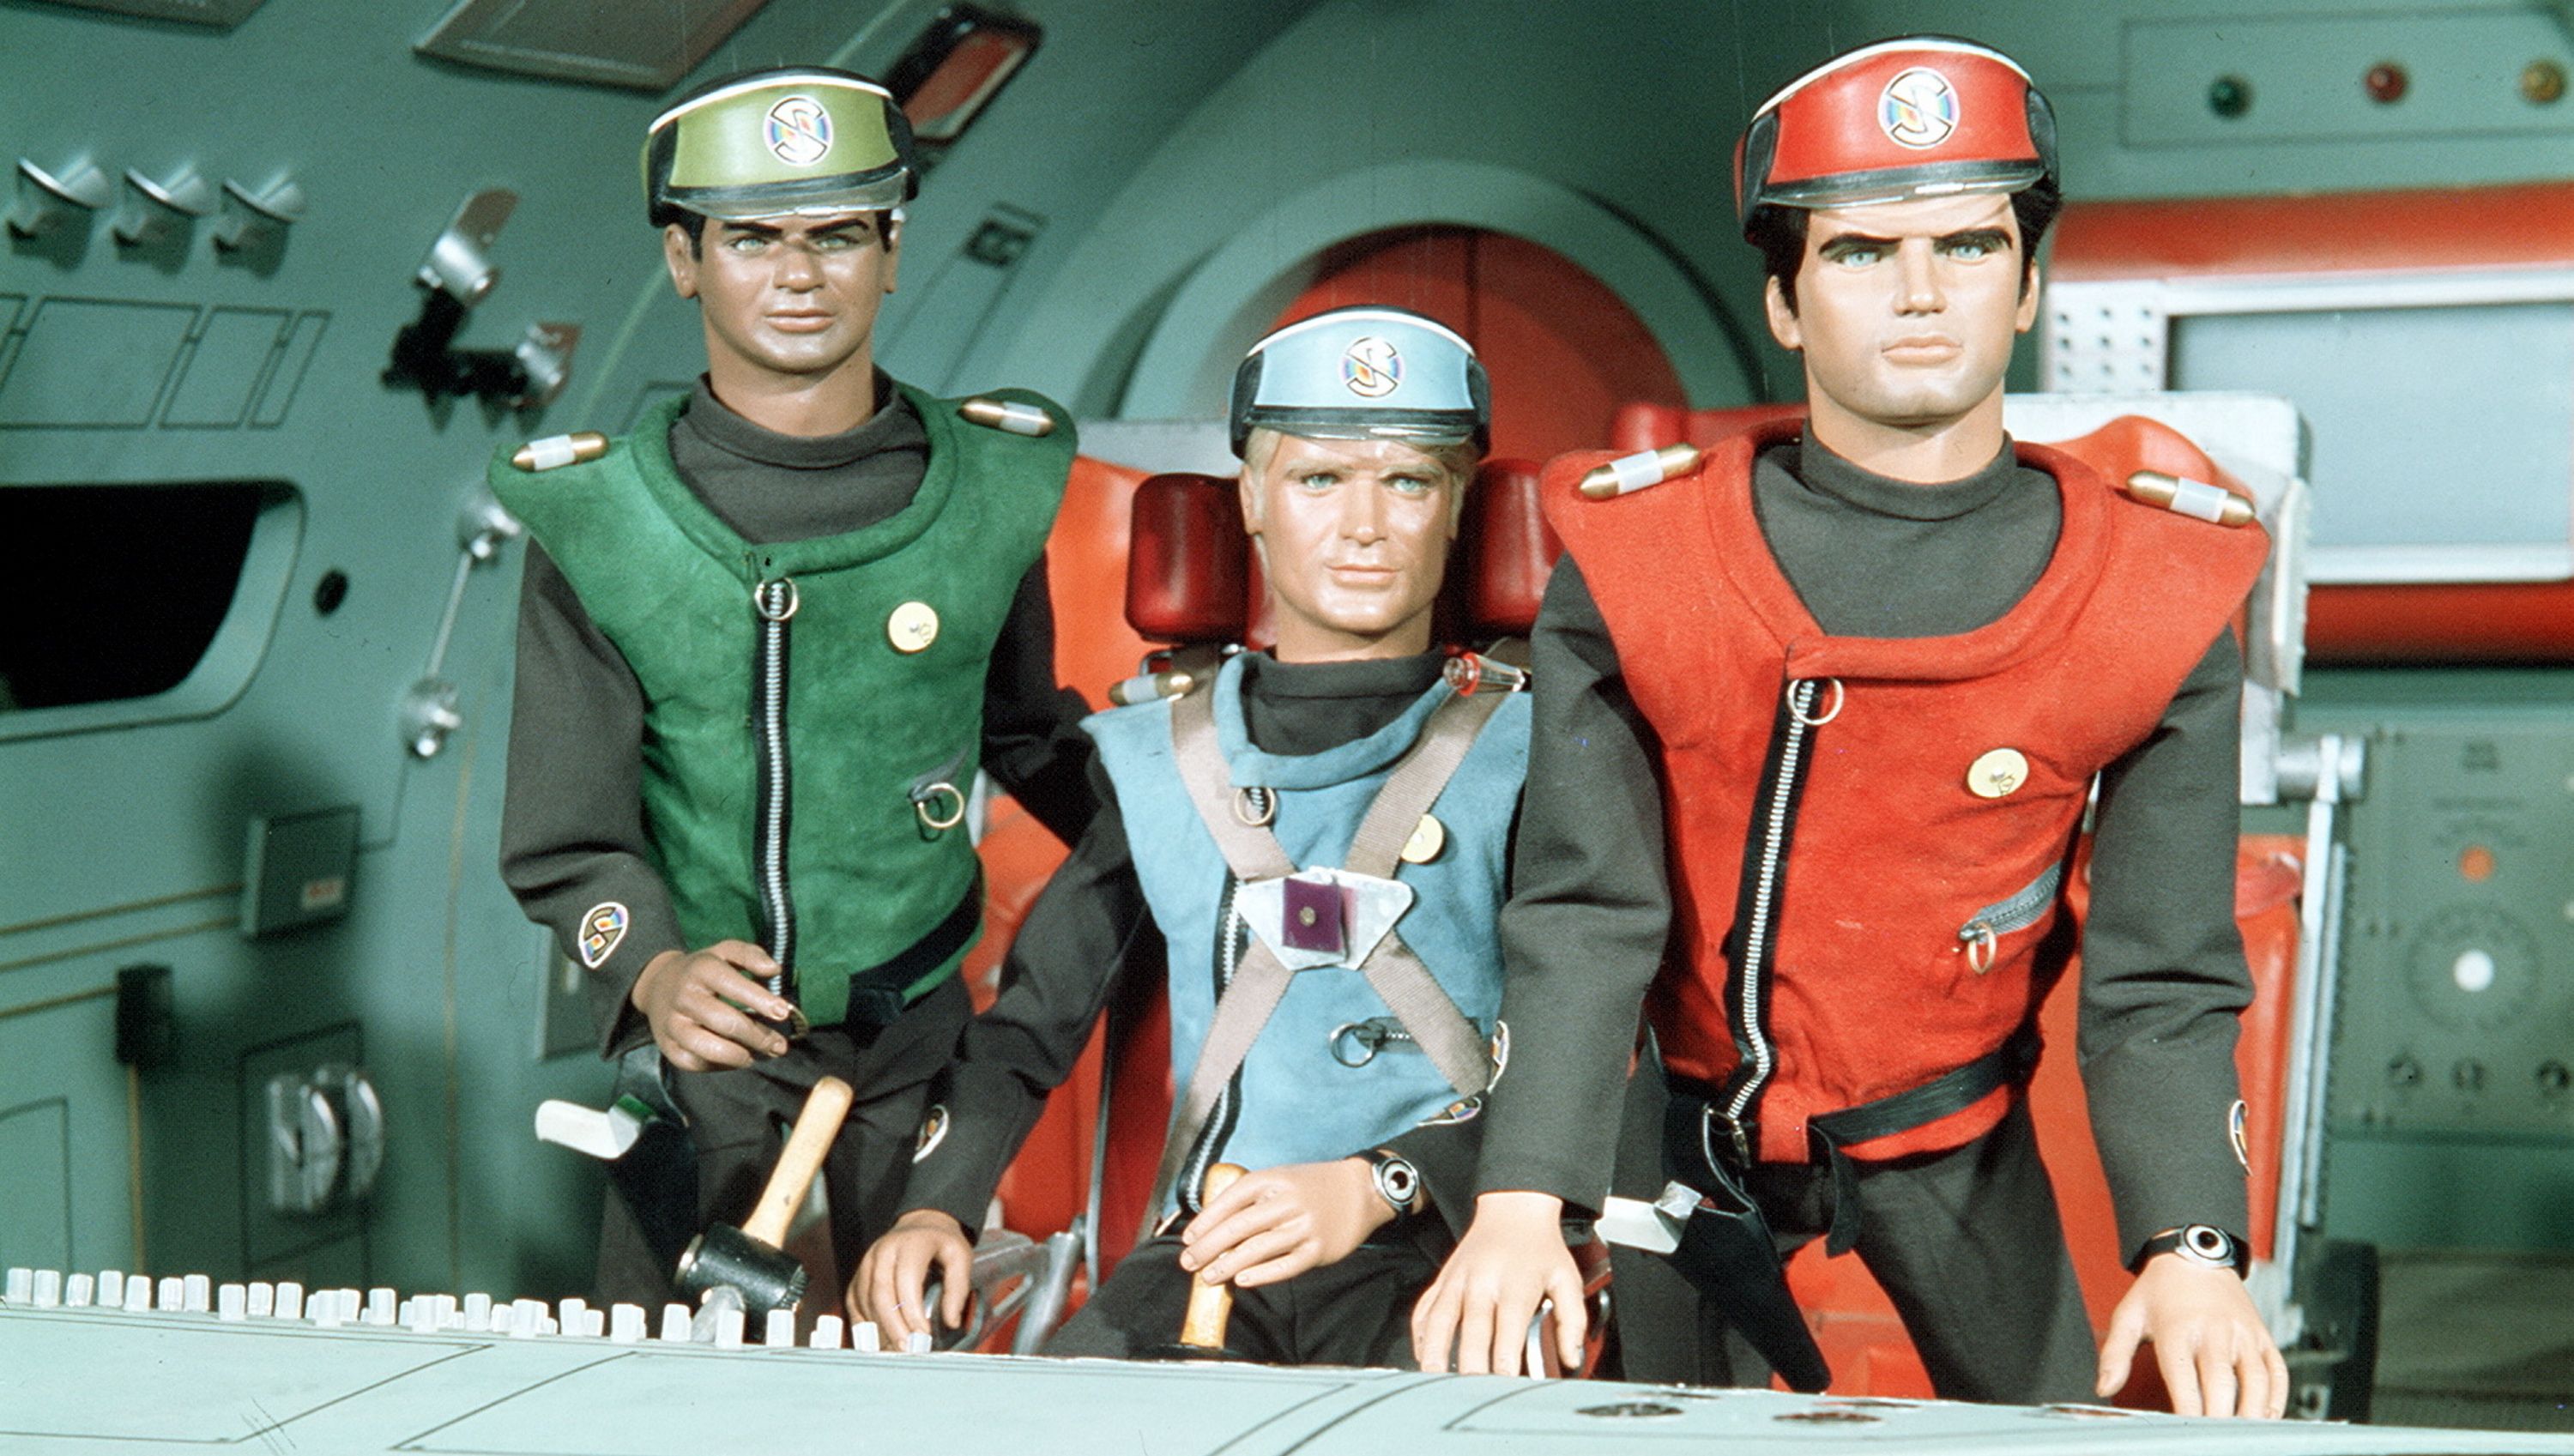 Captain Scarlet is celebrating its 50th anniversary with an